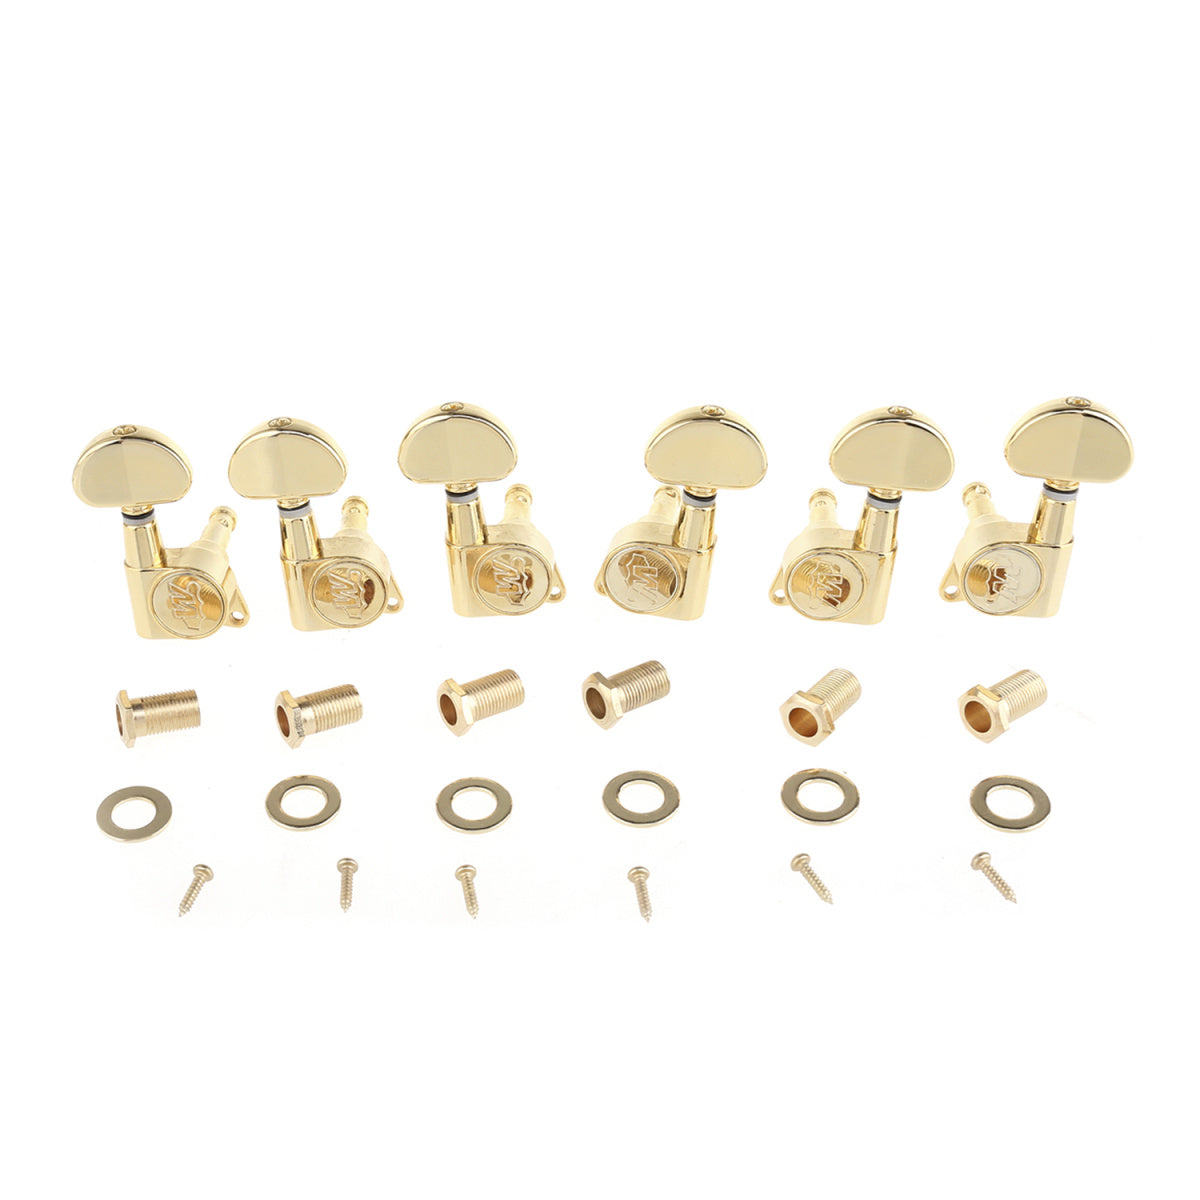 Wilkinson 3R3L E-Z-LOK Guitar Tuners Machine Heads Tuning Pegs Keys Set for Electric or Acoustic Guitar, Gold